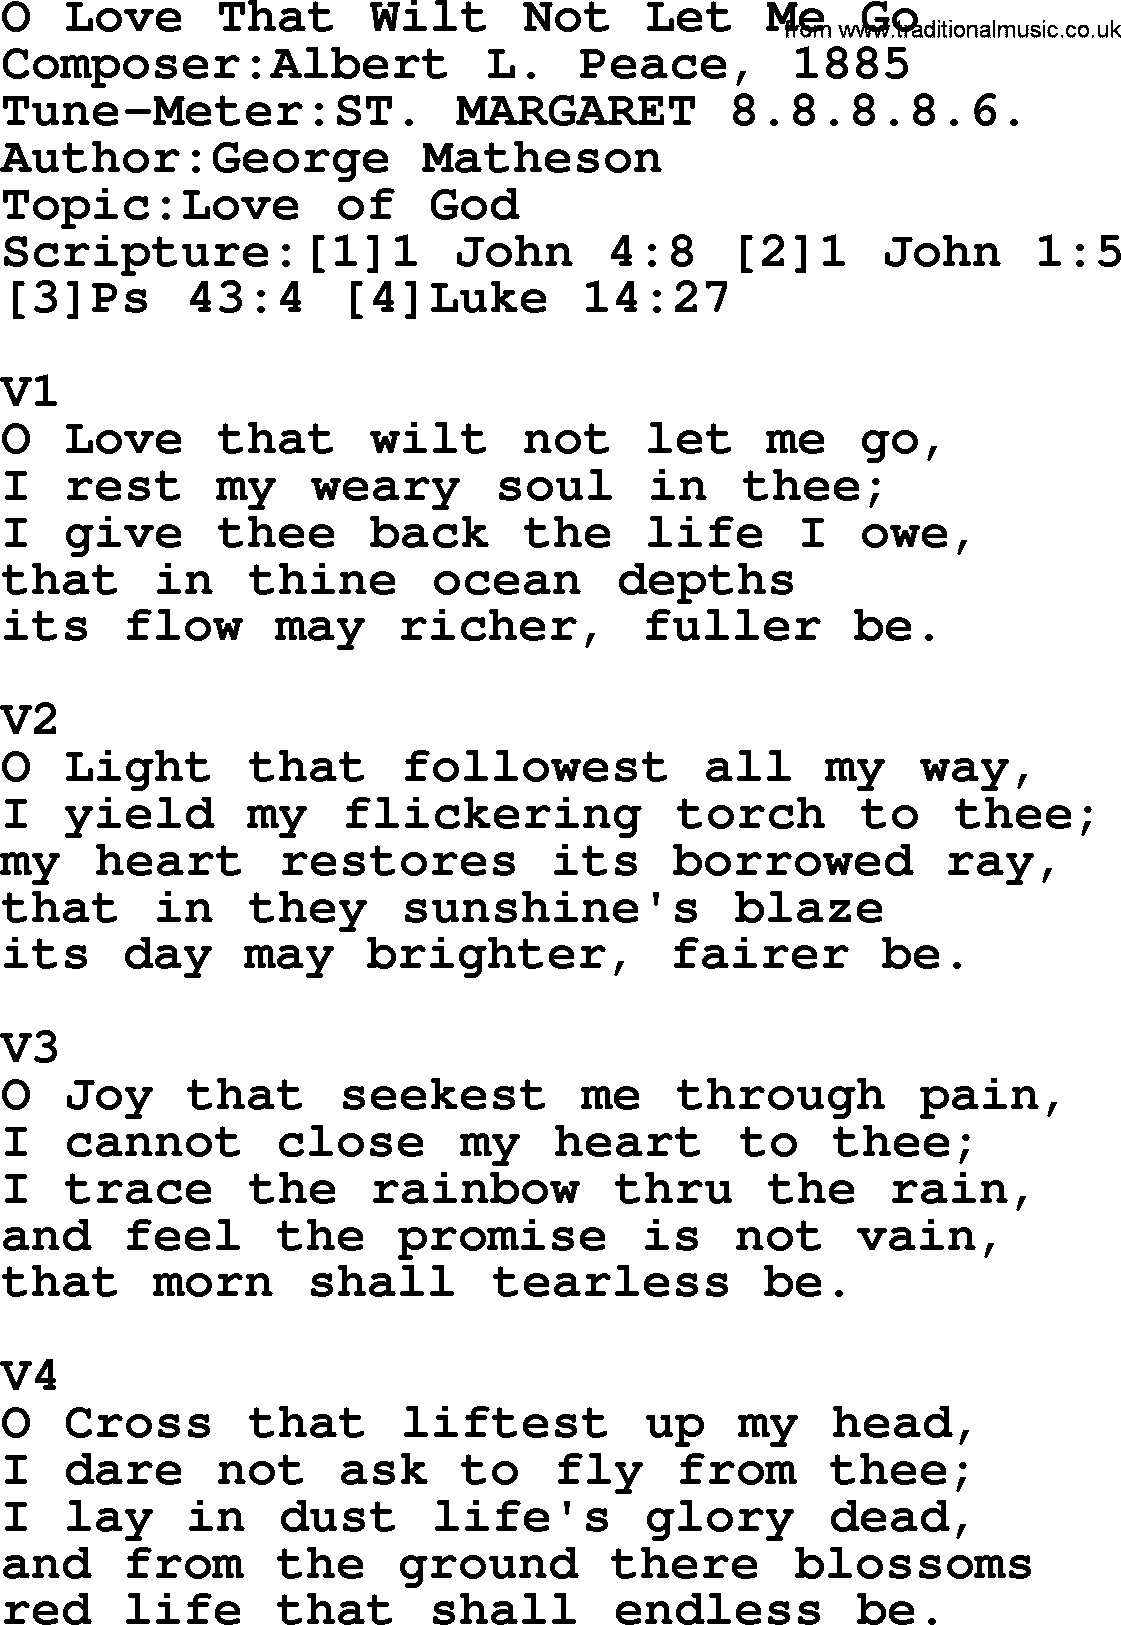 Adventist Hynms collection, Hymn: O Love That Wilt Not Let Me Go, lyrics with PDF